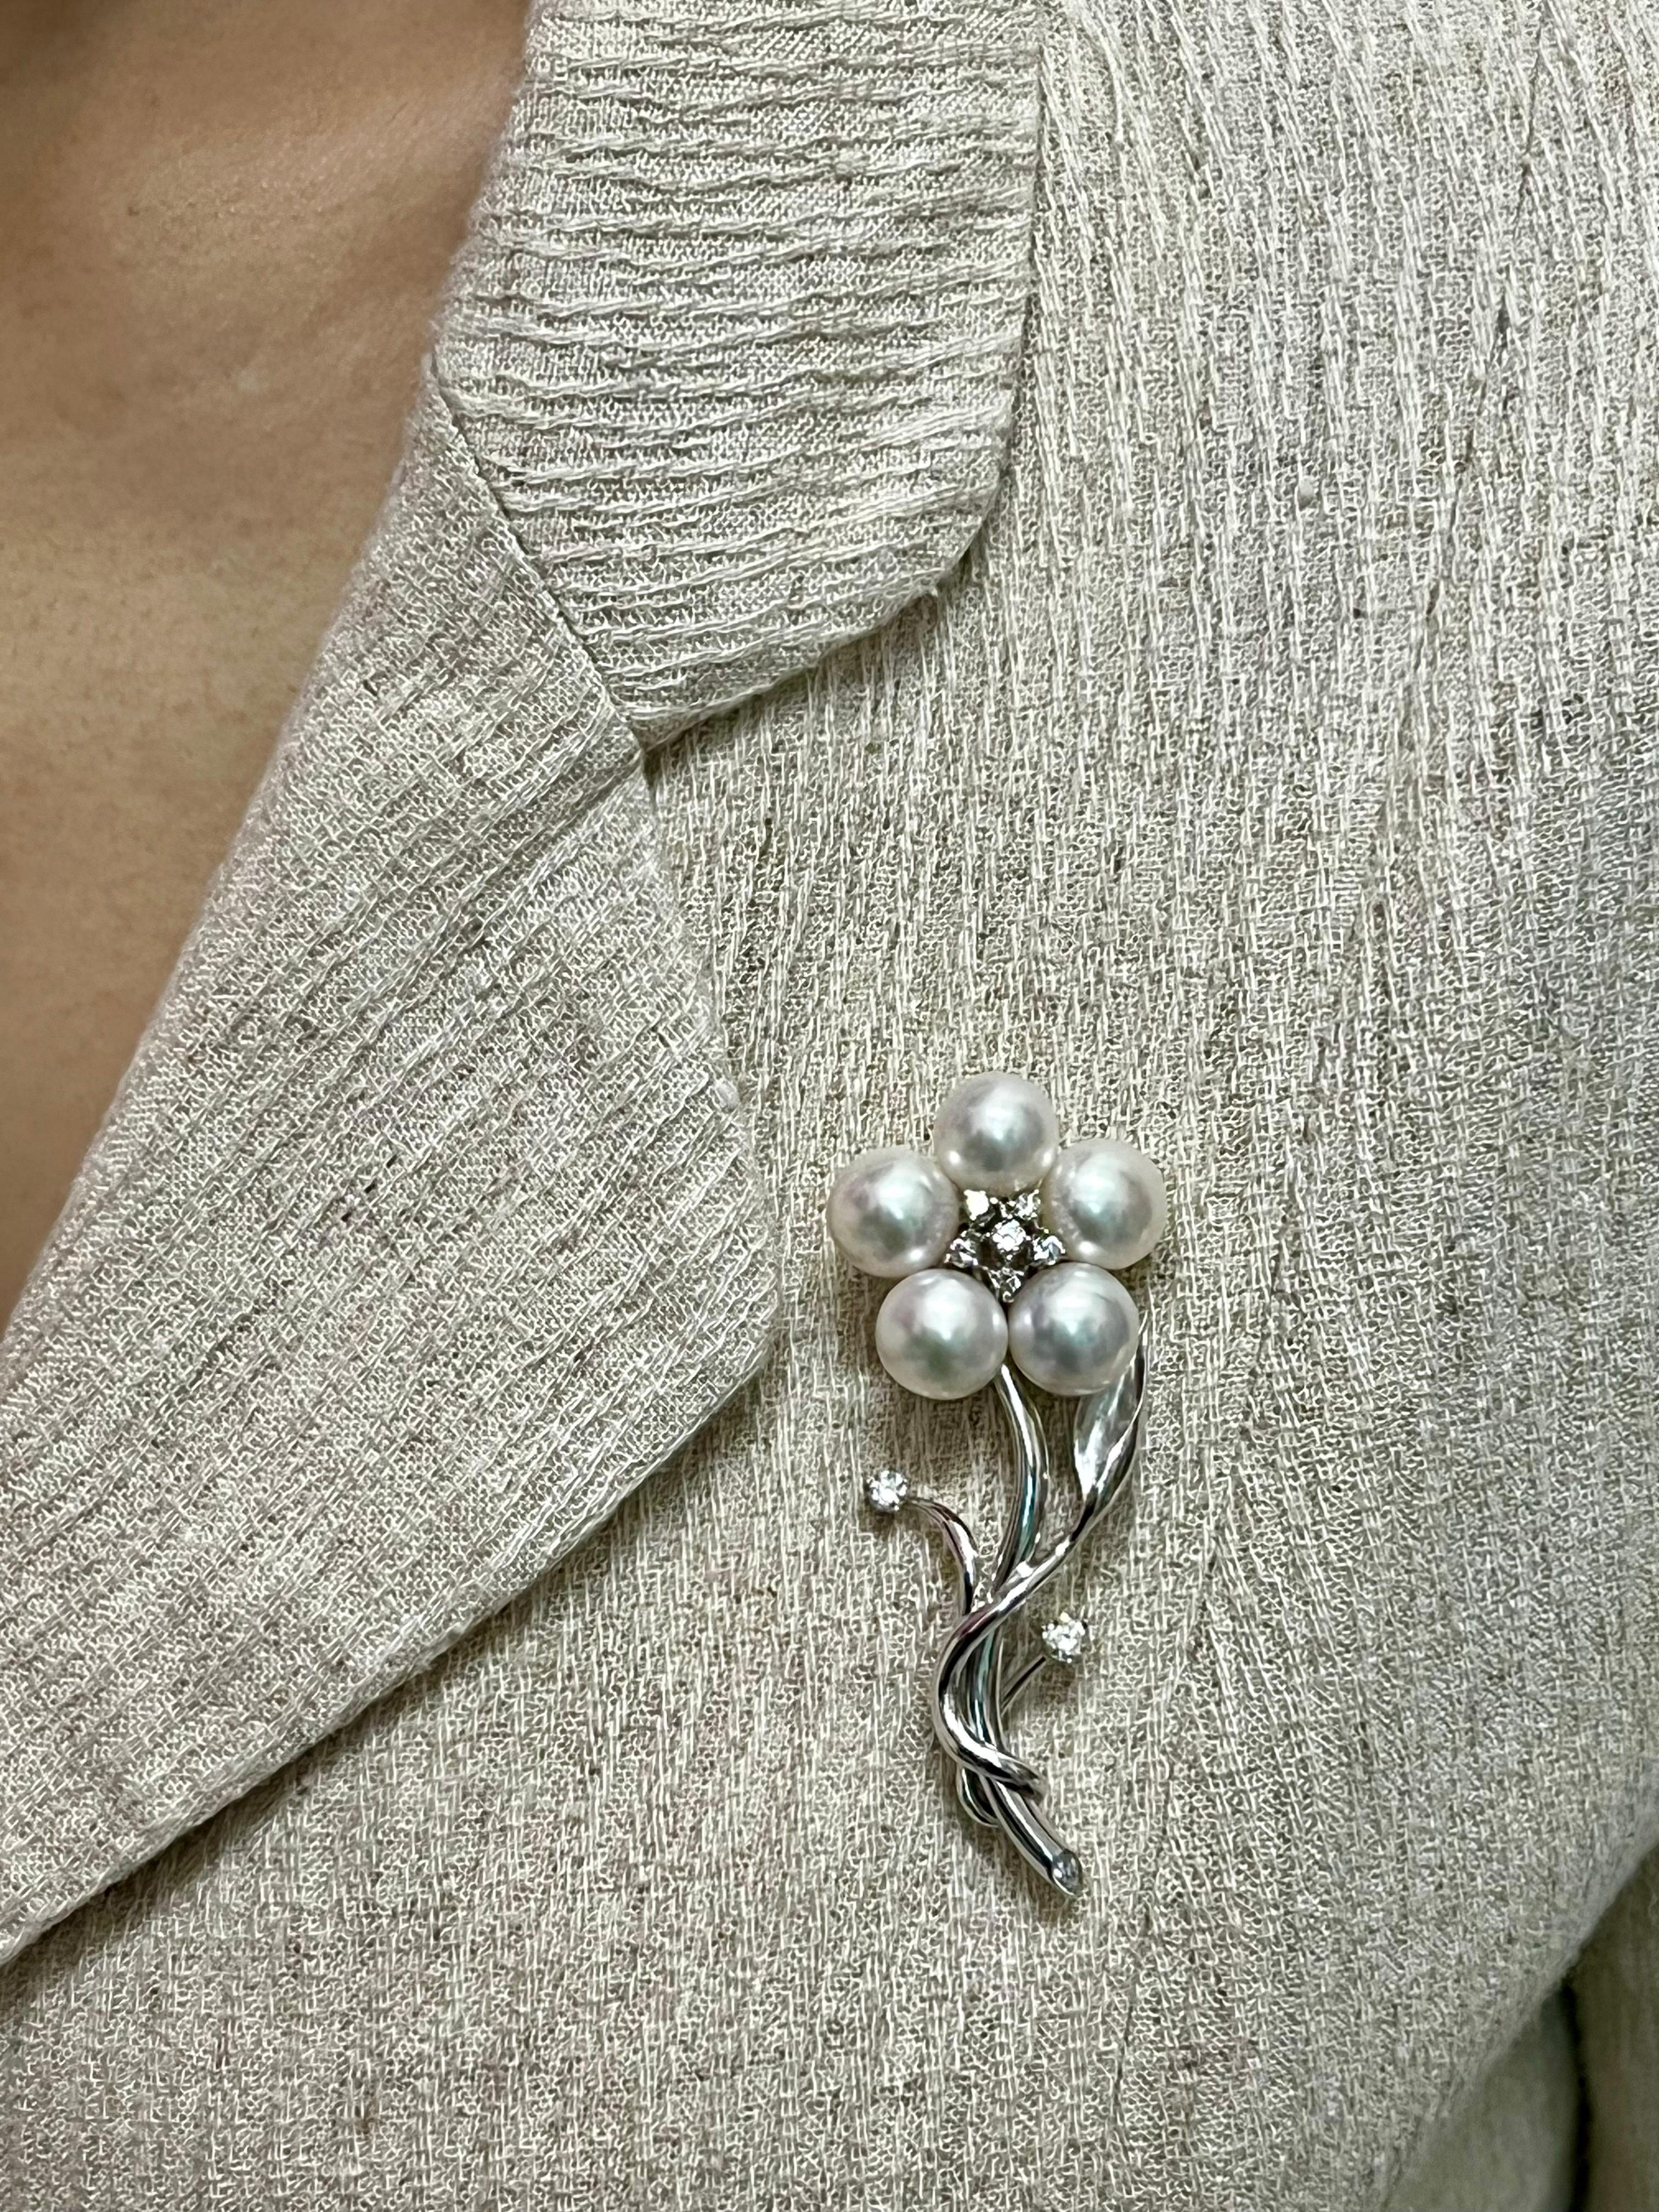 Please check out the HD video. This brooch has a classic flower design. It looks good dressed up or down. The brooch is about 6.5cm x 2.5cm. This brooch is 18k white gold set with 5 freshwater pearls average 10mm each in size. There are 3 larger